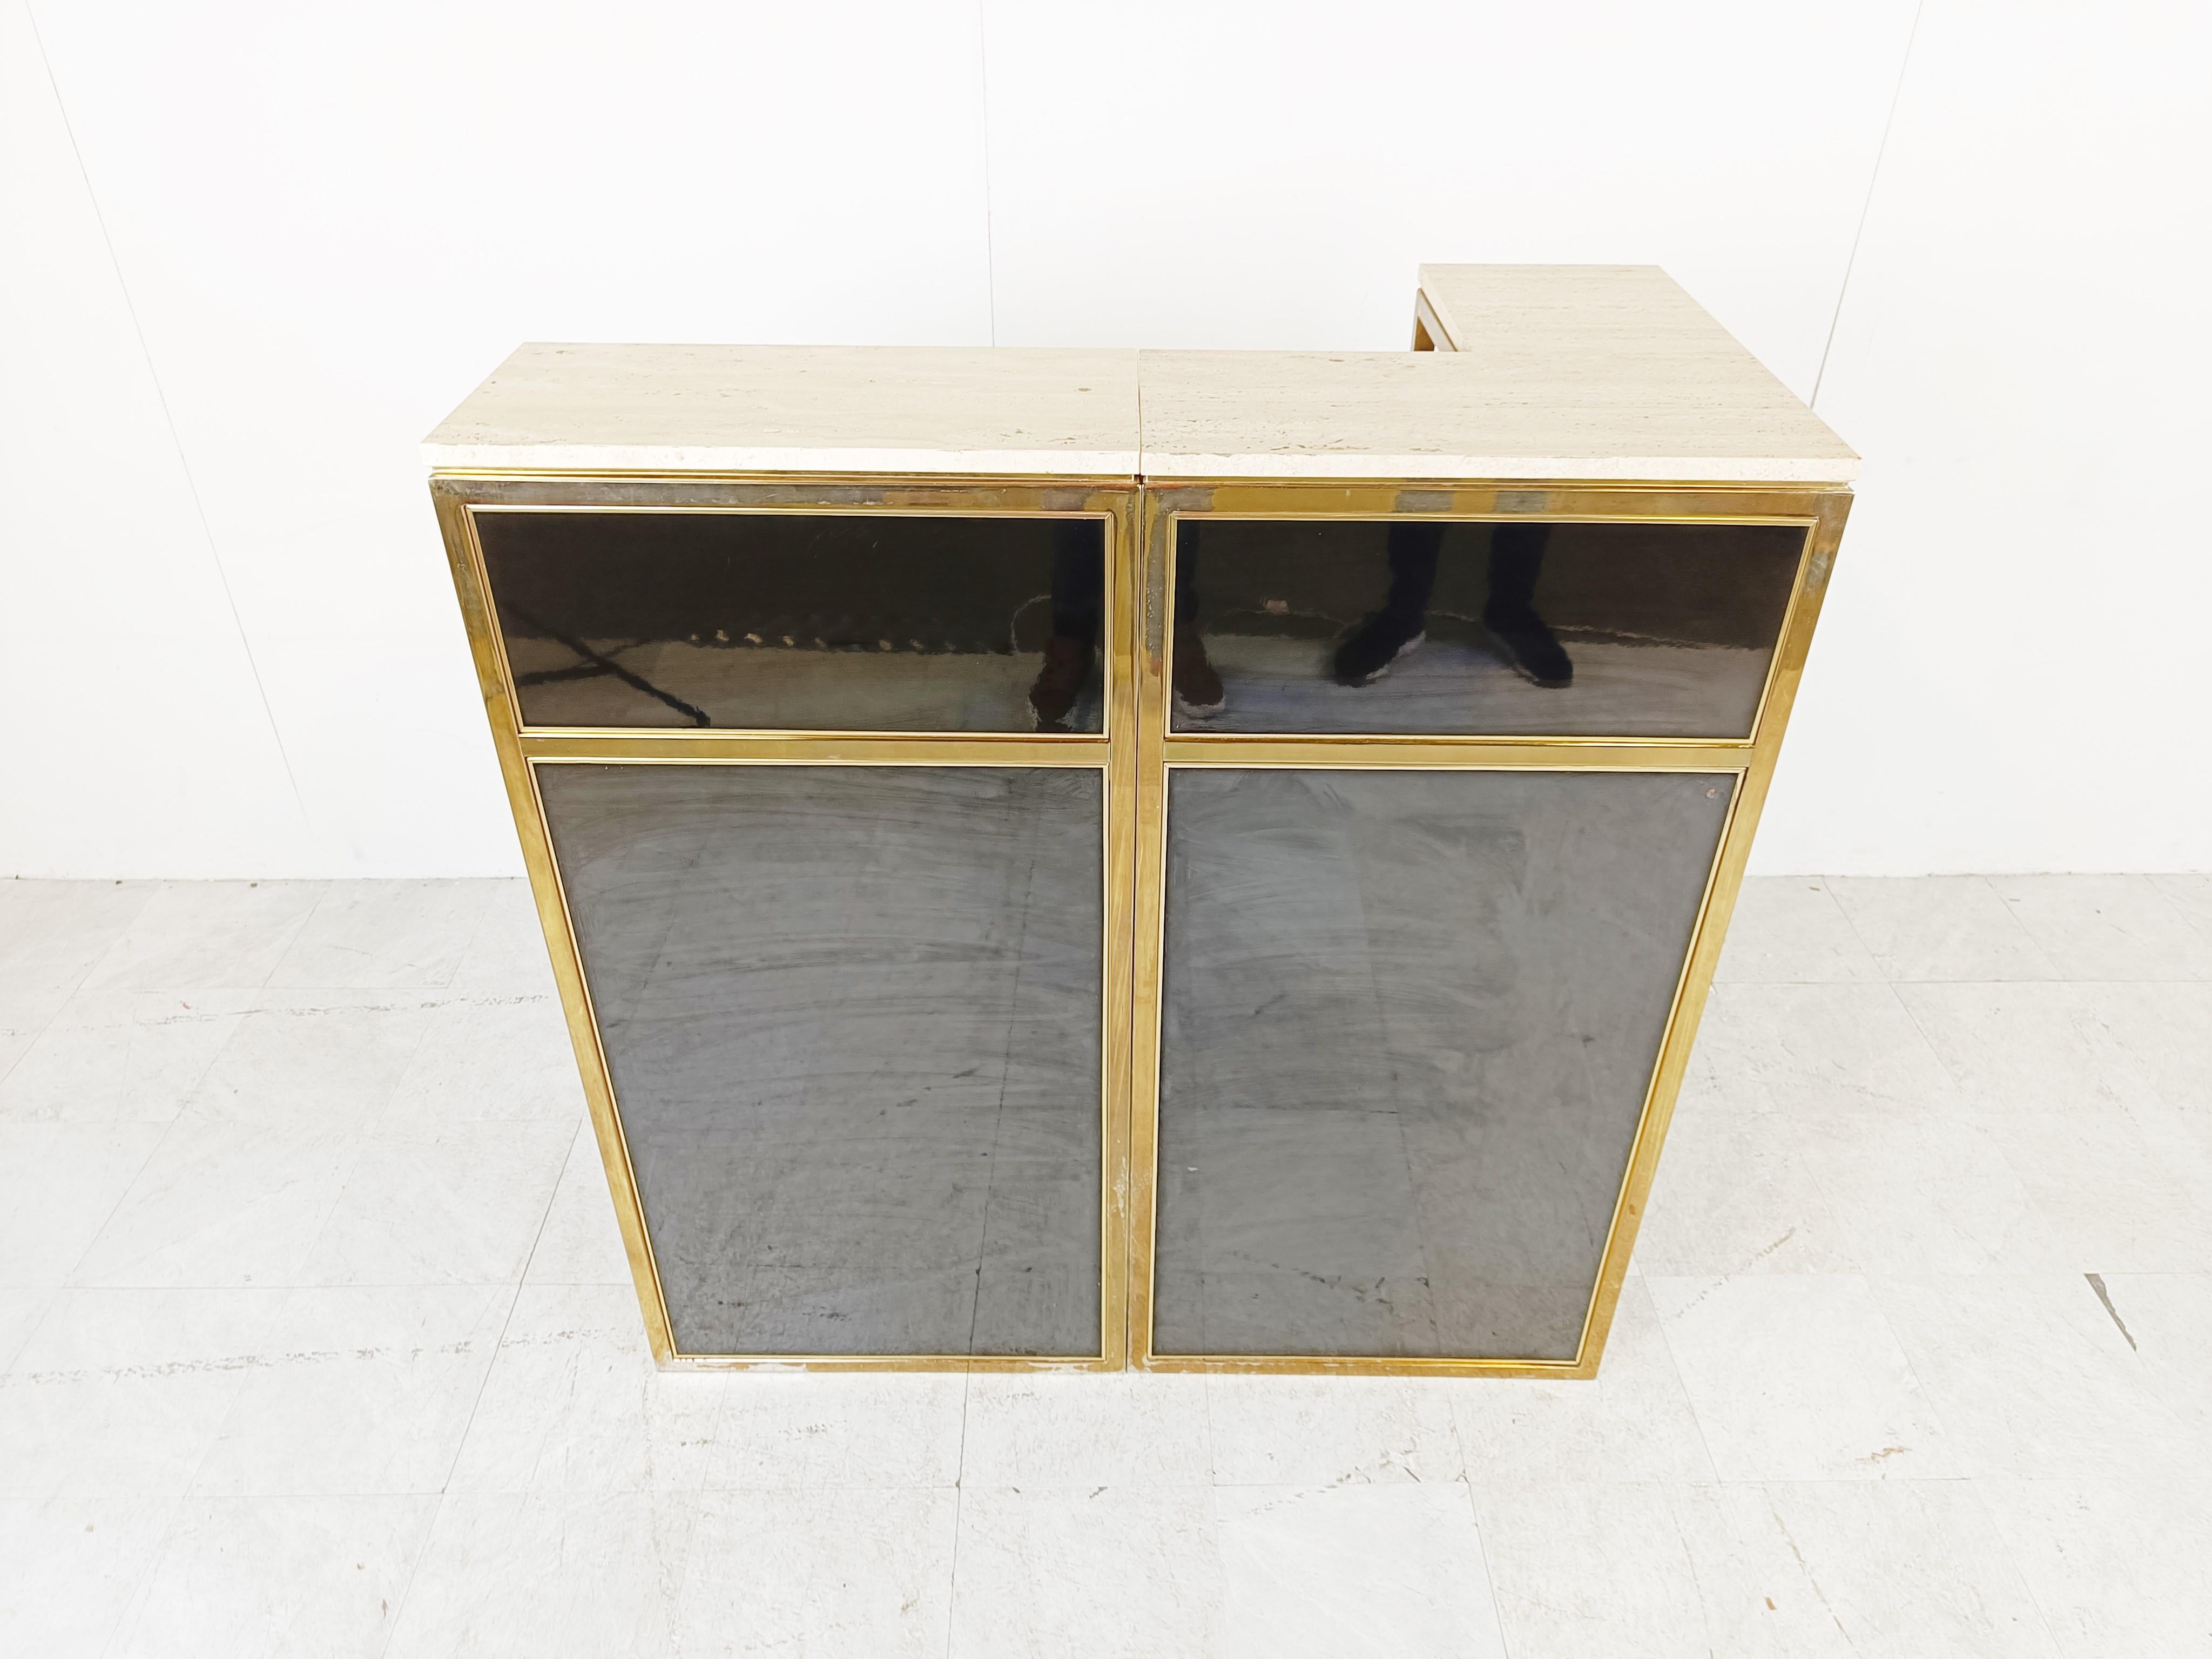 Hollywood regency 2-module bar counter made brass, black lacquer and a travertine top.

This high quality bar is a real eye catcher and has a very luxurious appeal.

Its a nice and small bar counter with a corner, ideal for an appartment or